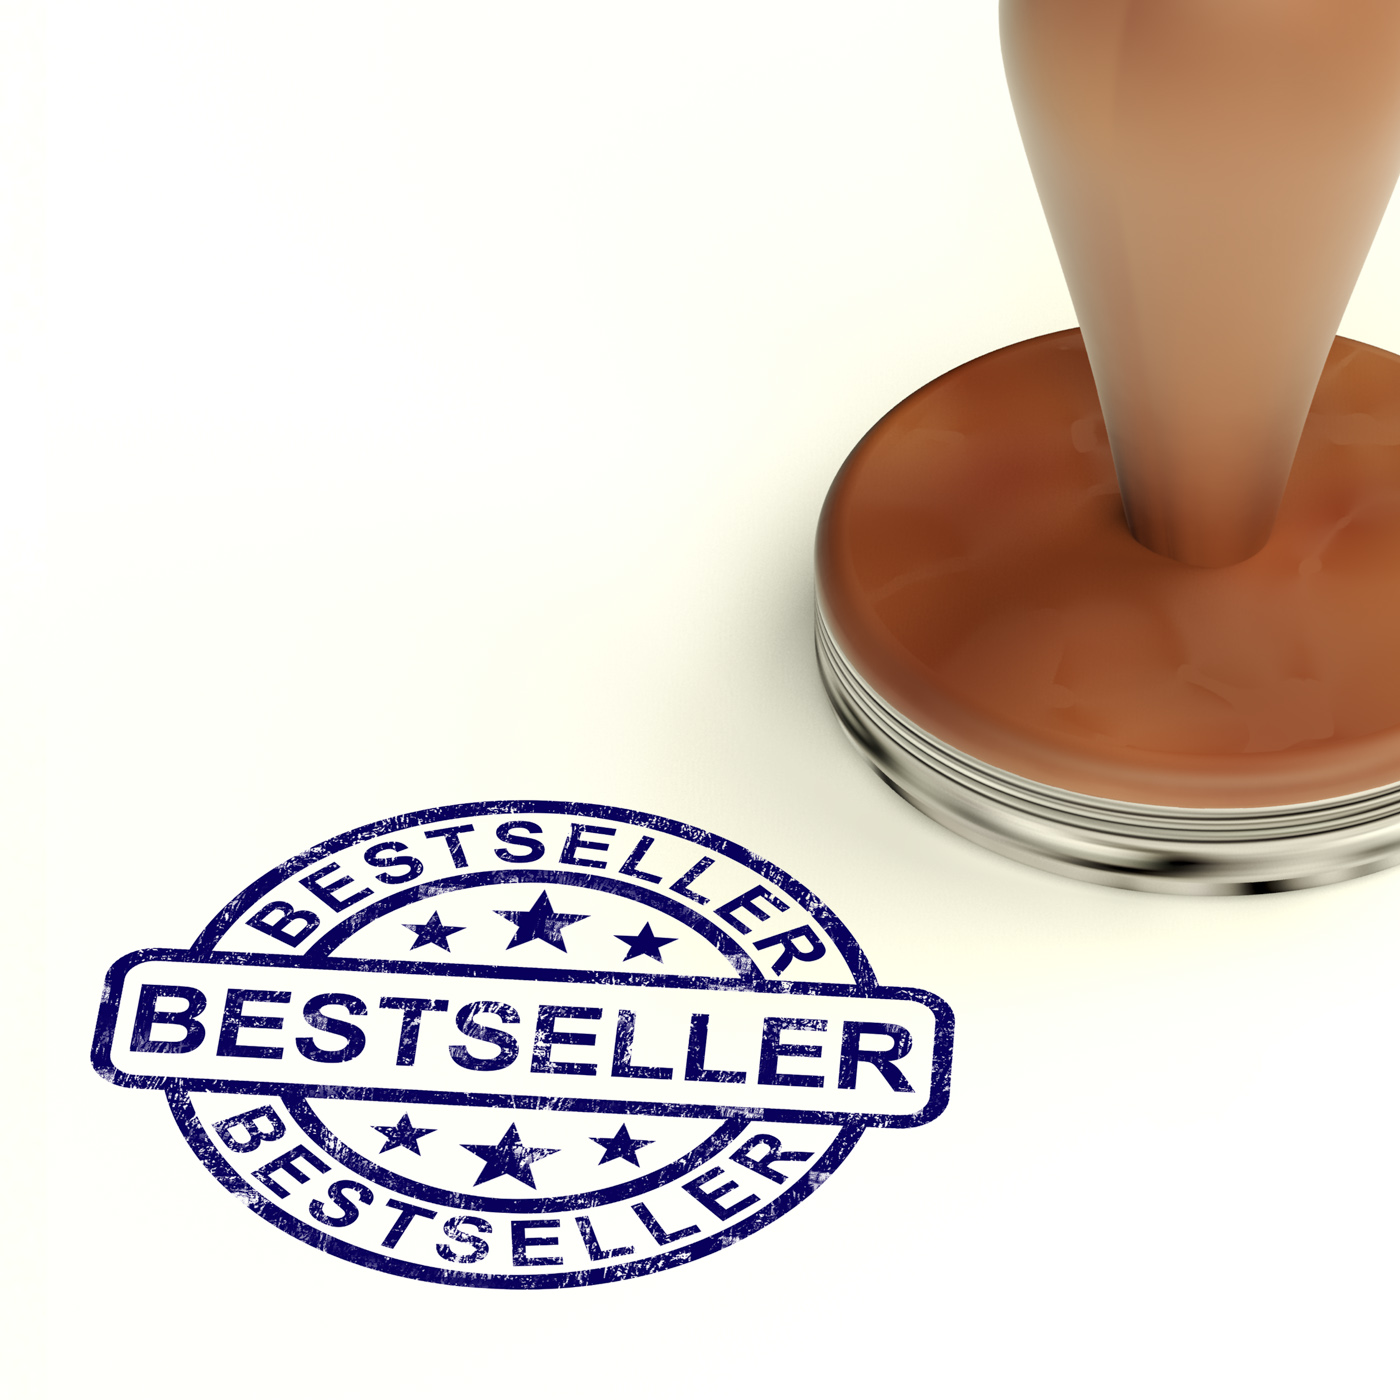 Bestseller stamp showing top rated or leader photo